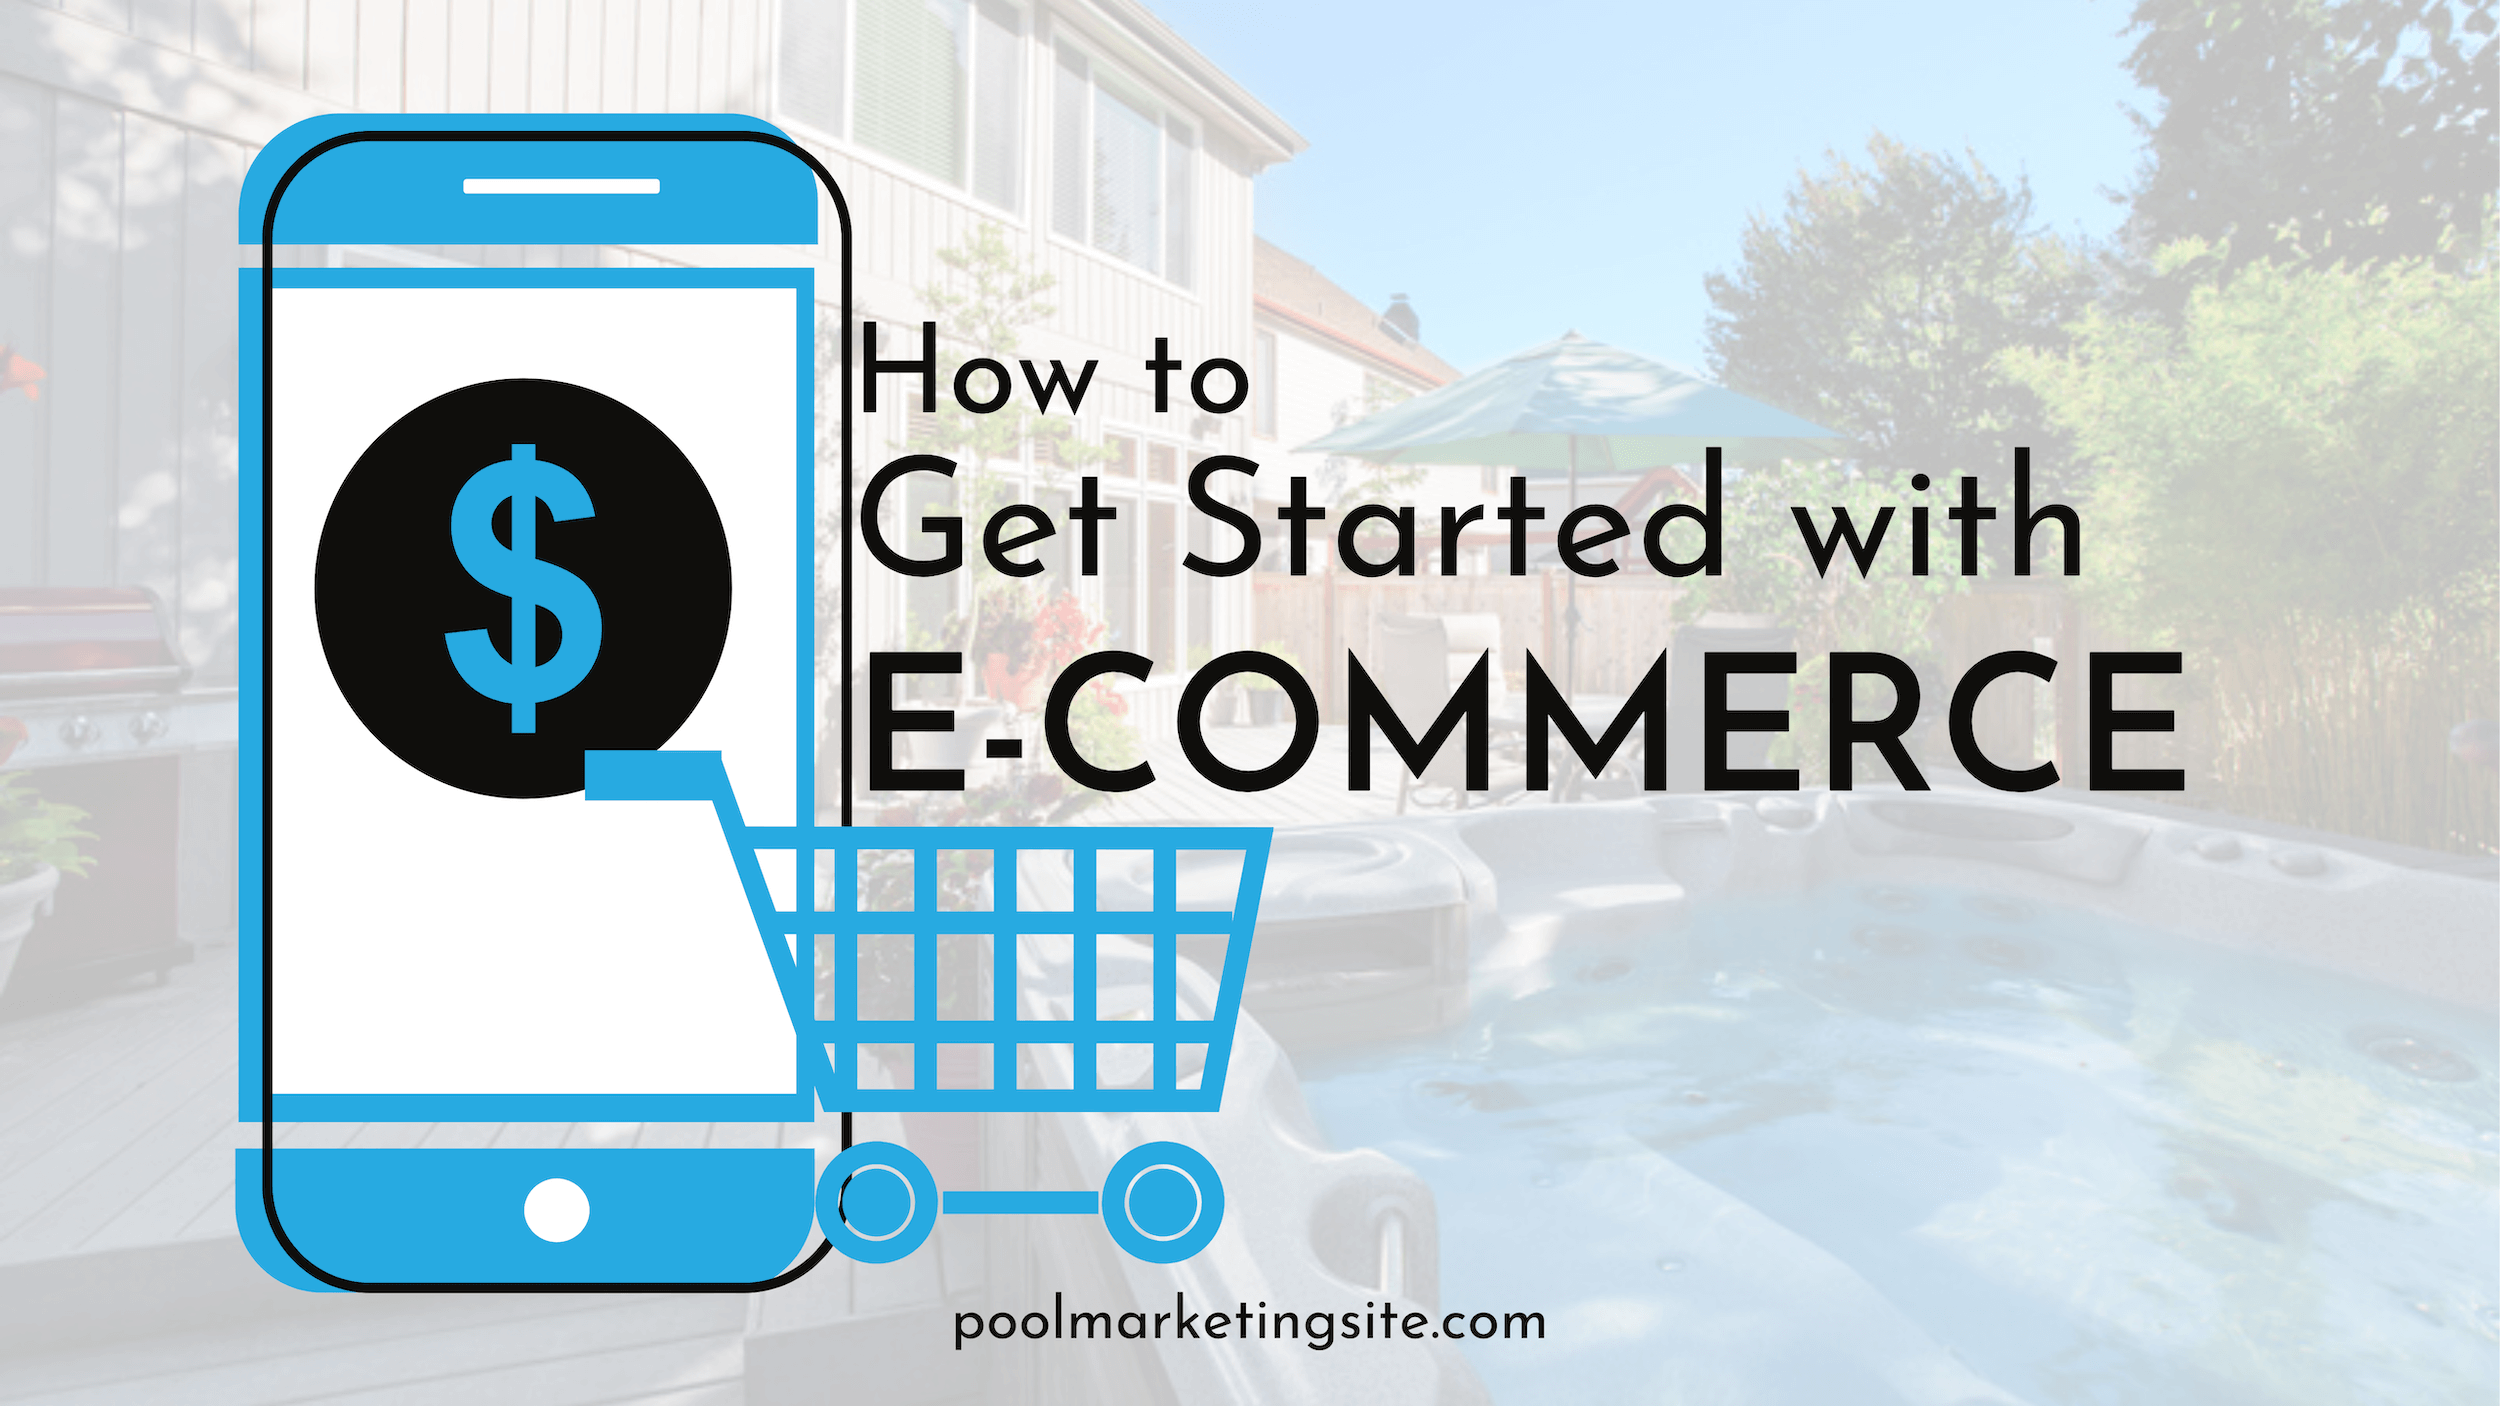 How to Get Started with E-Commerce